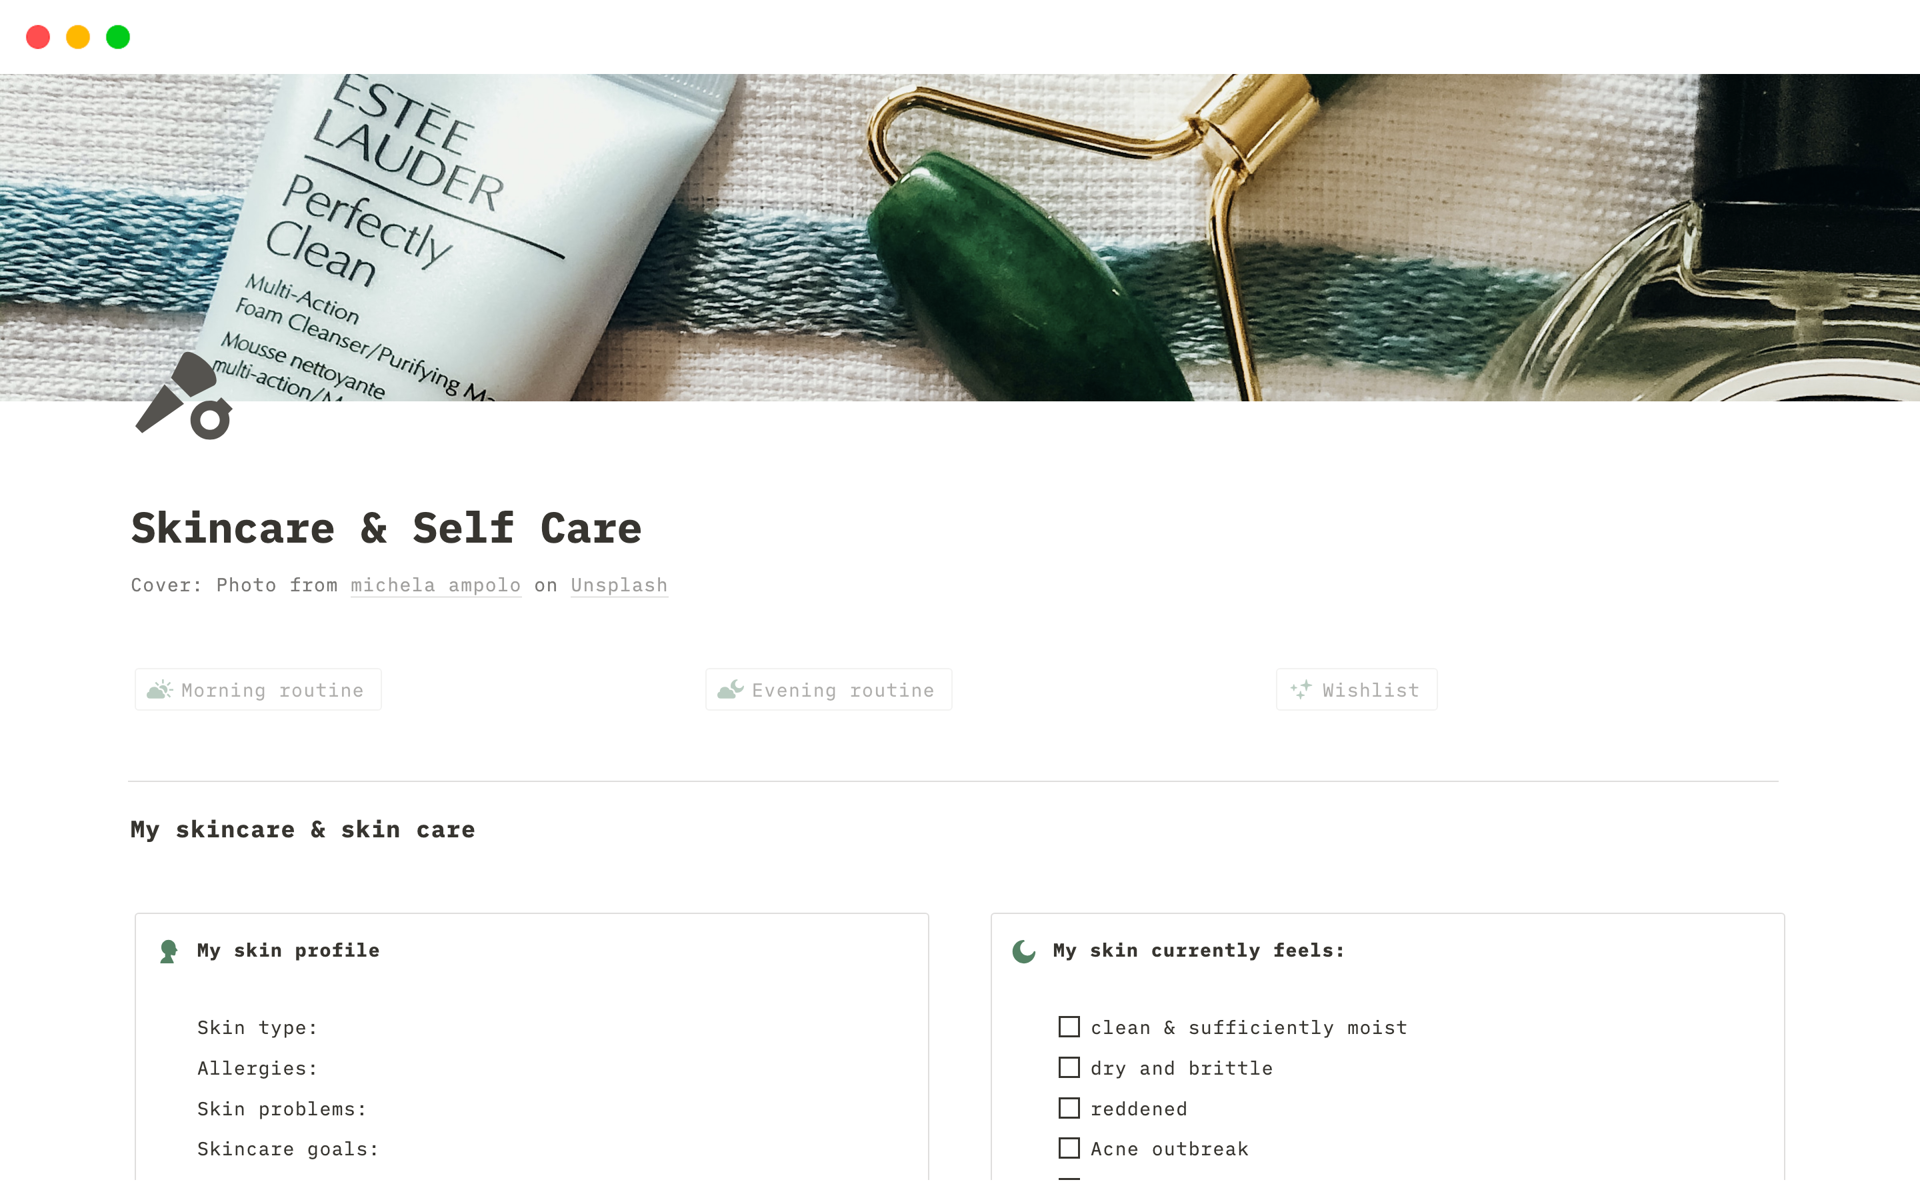 This template allows you to organize your skincare, manage product information, get expert tips, and promote self-care. 